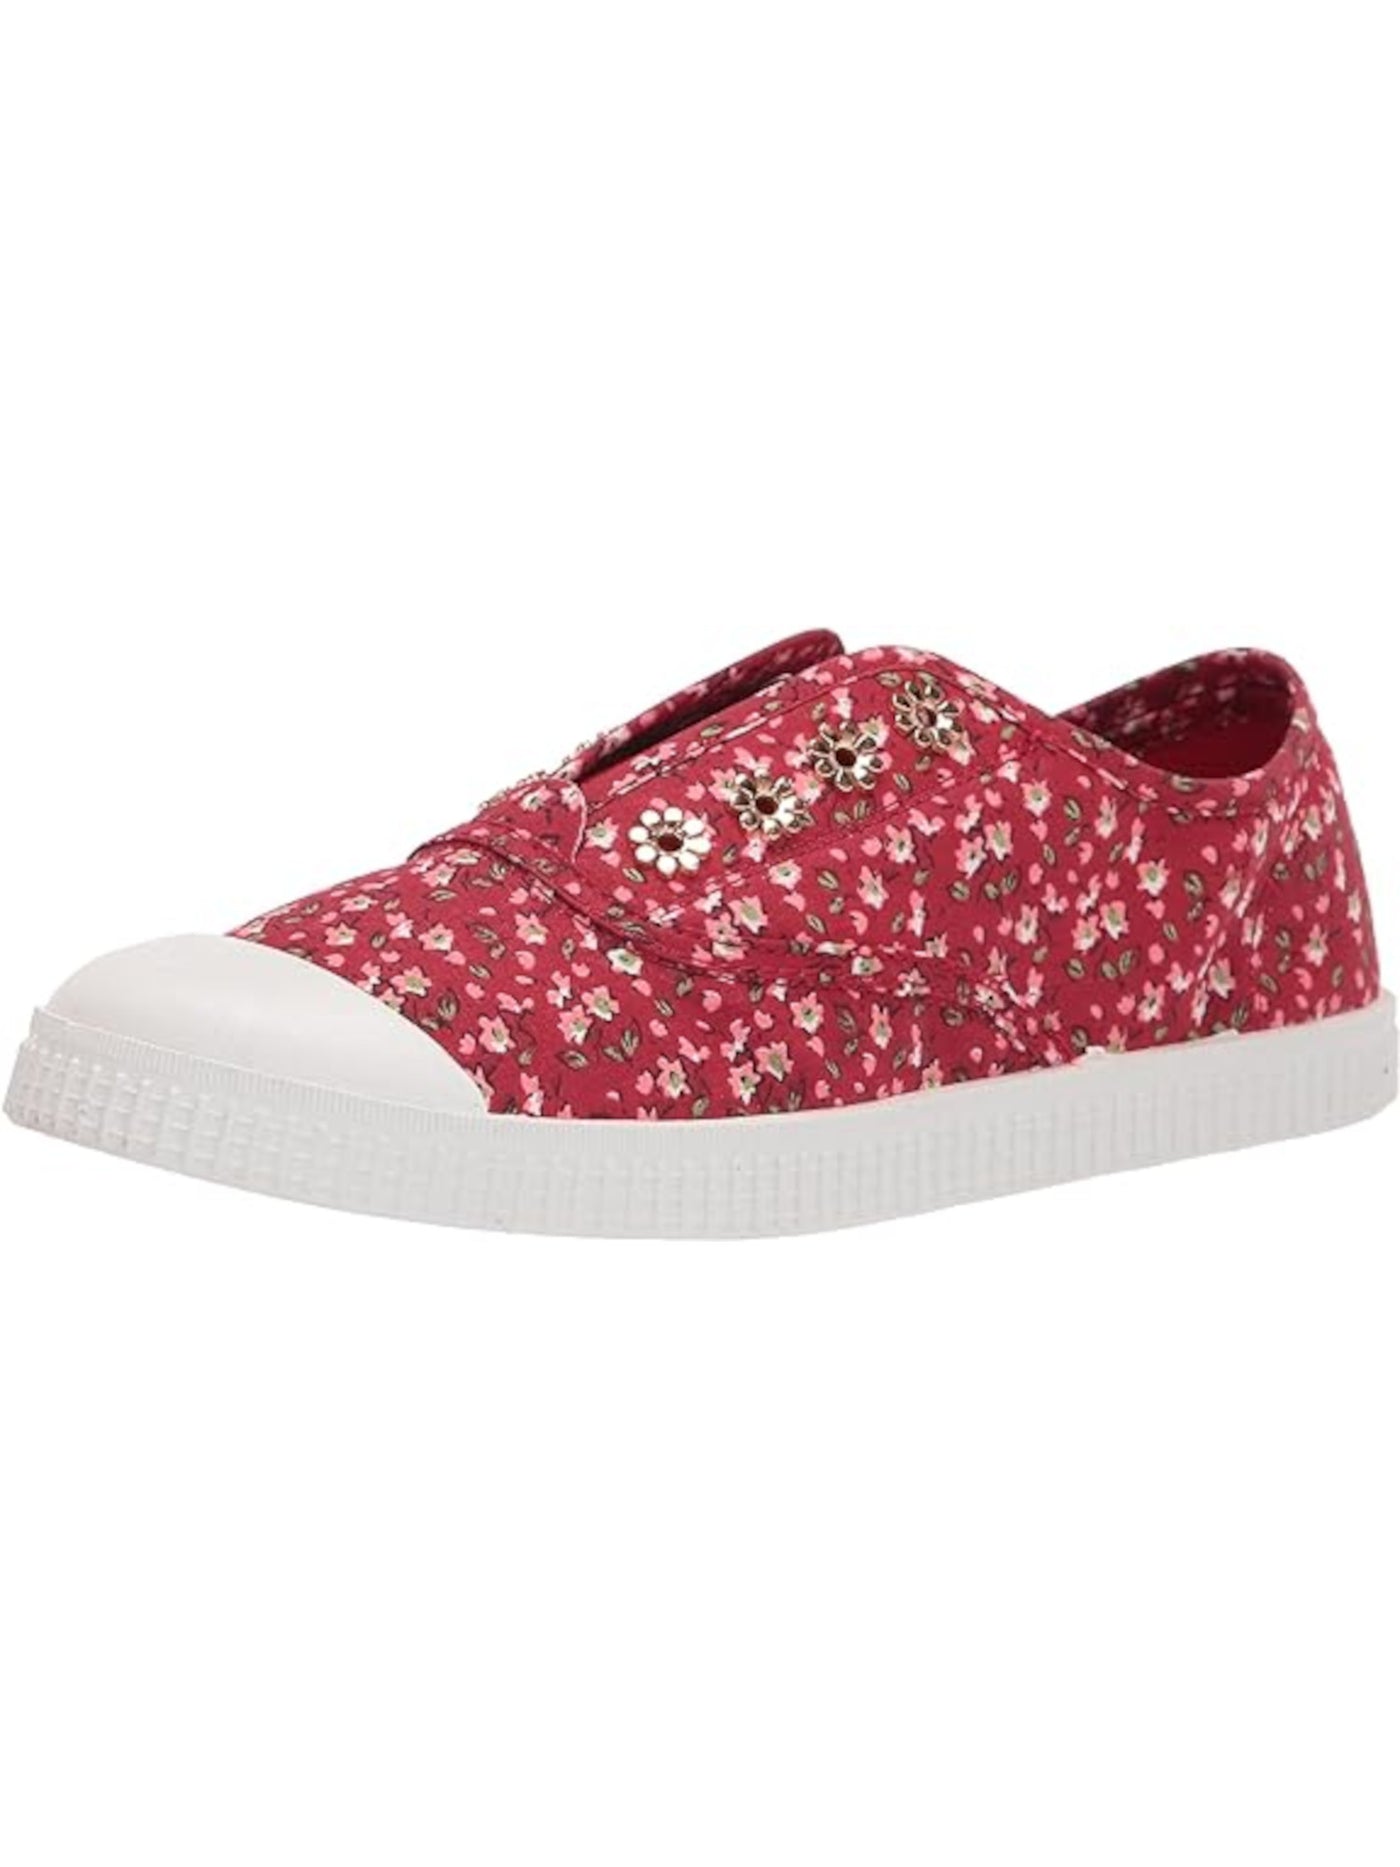 XOXO Womens Red Floral Decorative Eyelets Goring Padded Azie Cap Toe Slip On Sneakers Shoes 7.5 M